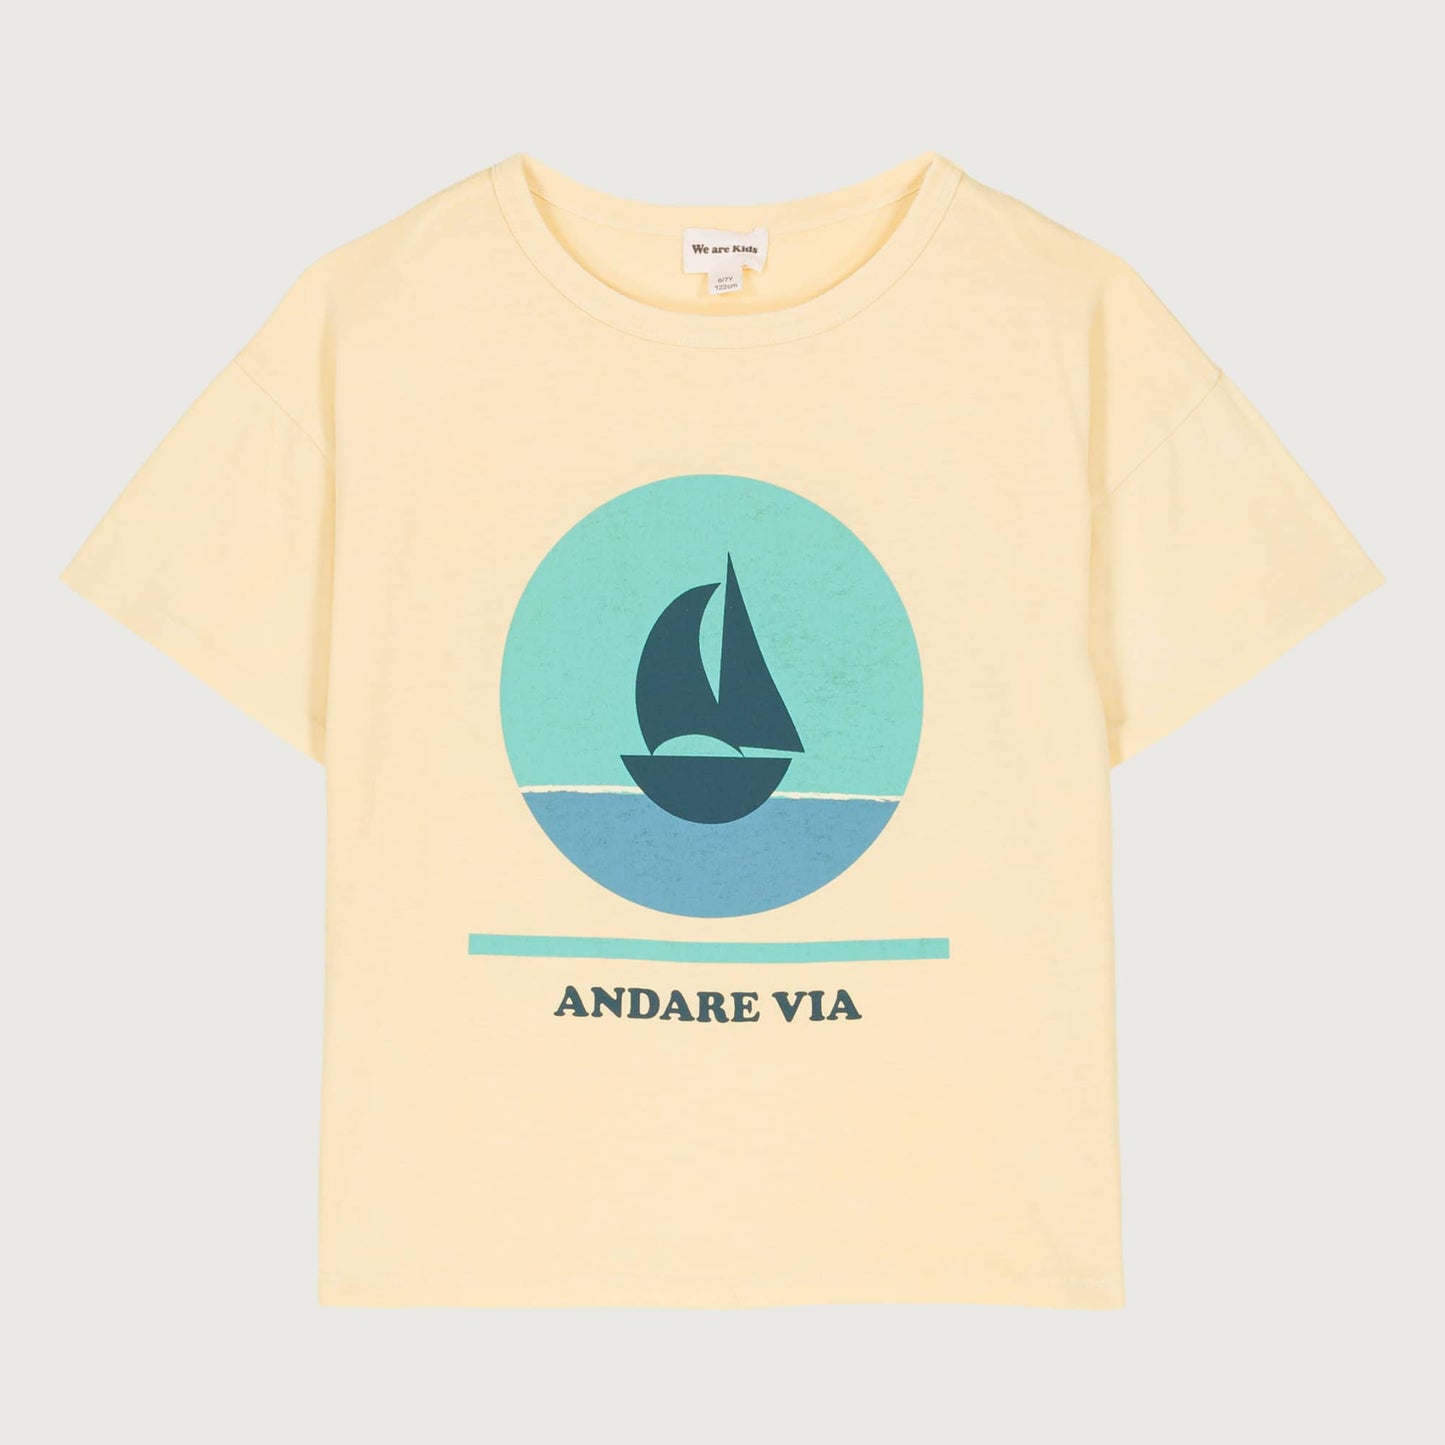 We Are Kids Tee Dylan Jersey Baby Sun ANDARE VIA